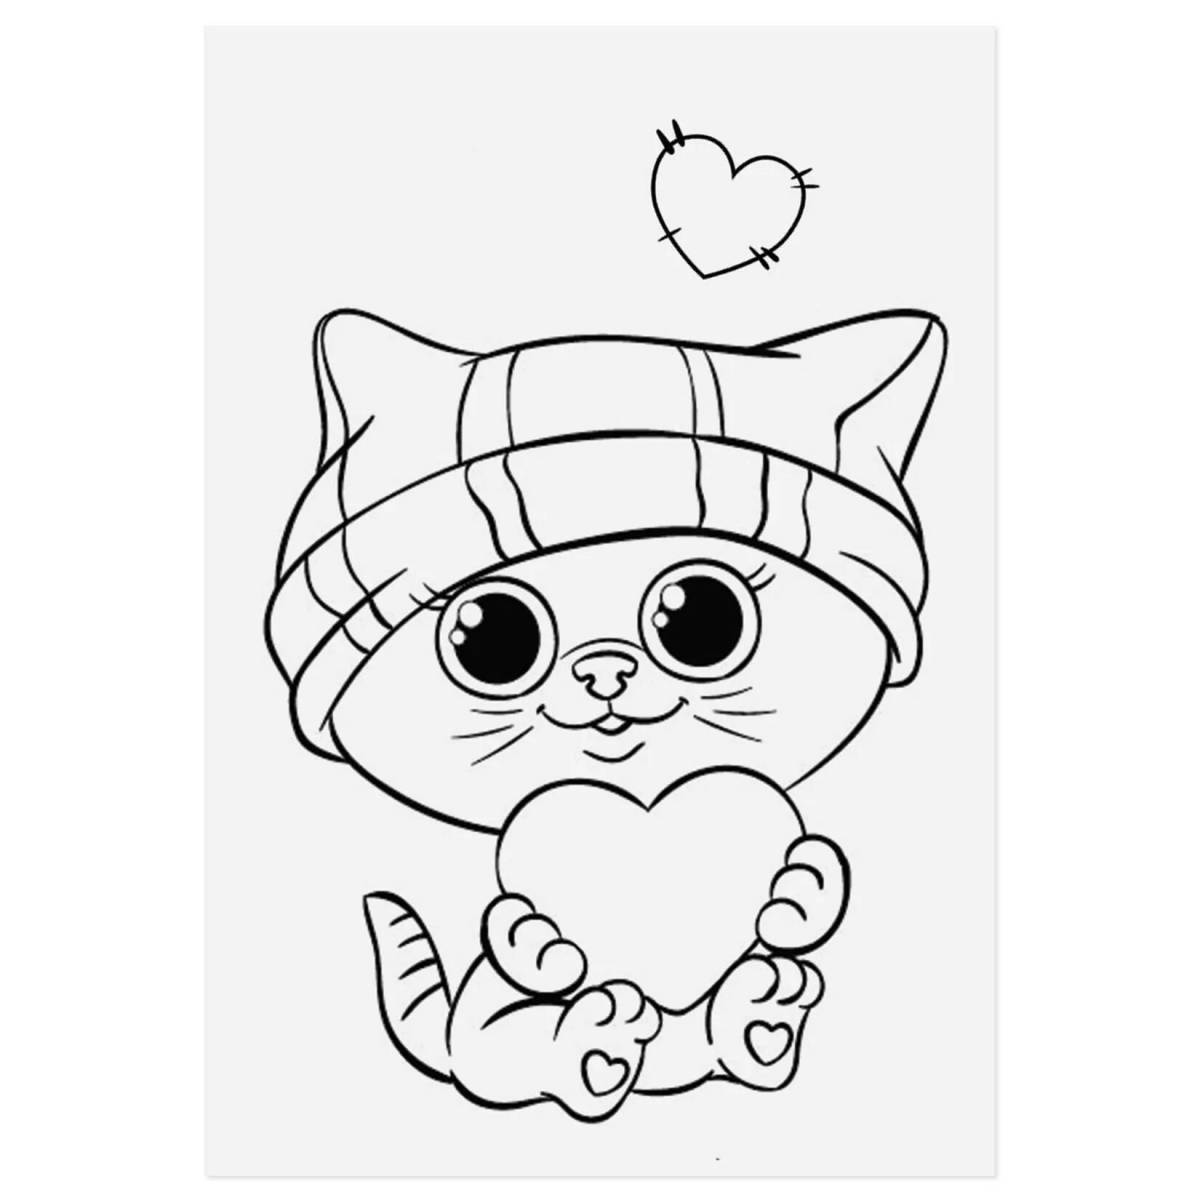 Lovely coloring book for girls 12 years old, cute cats